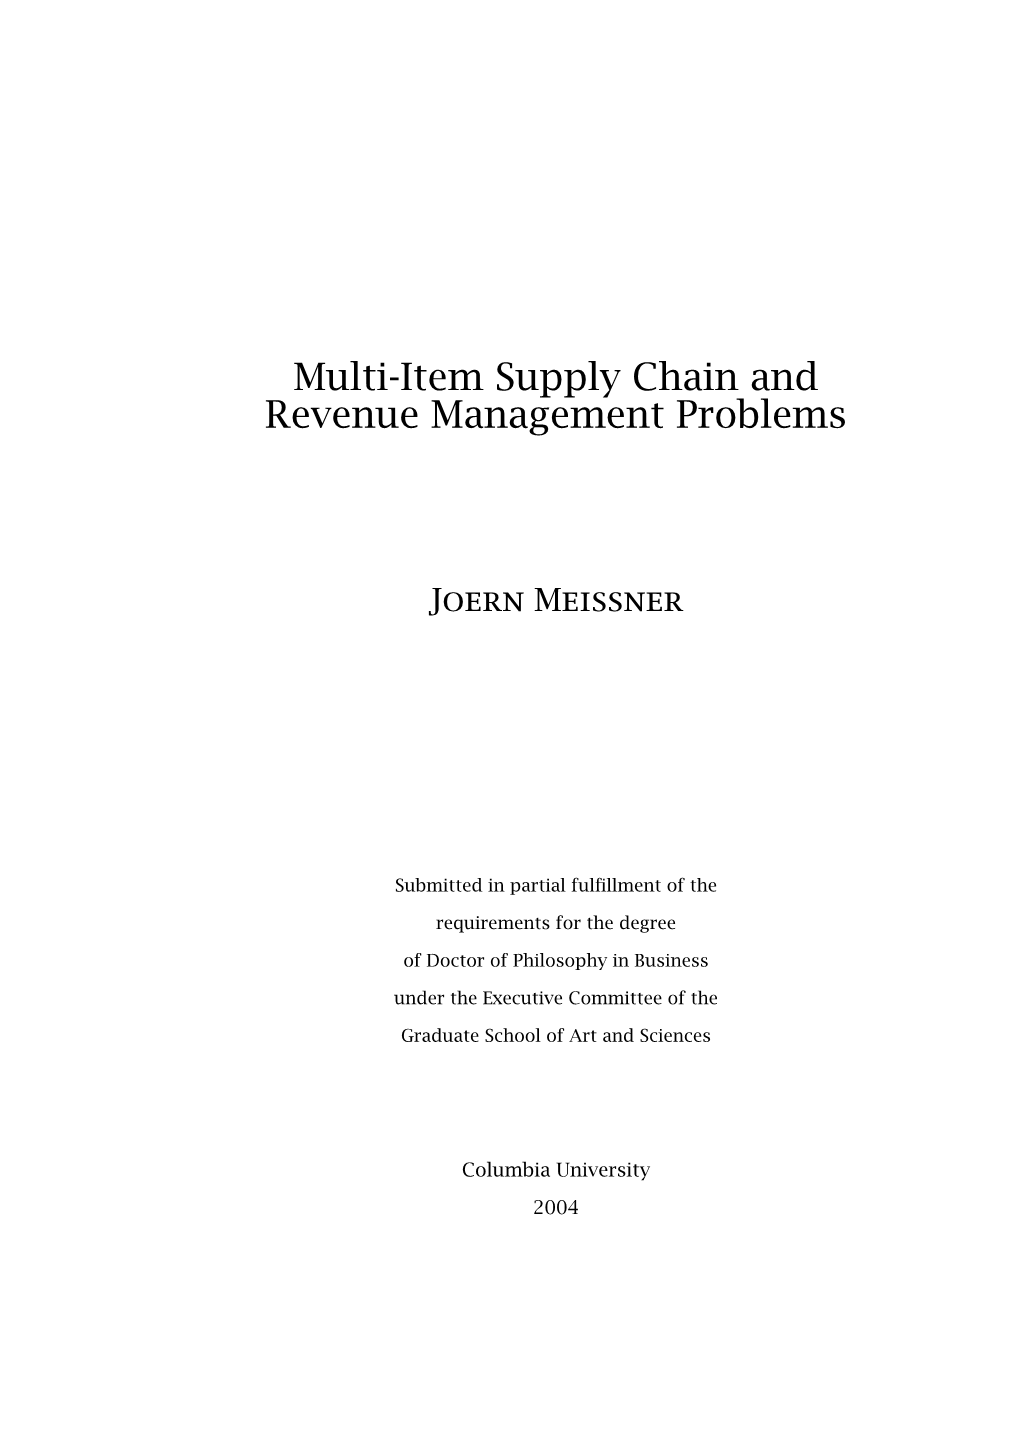 Multi-Item Supply Chain and Revenue Management Problems